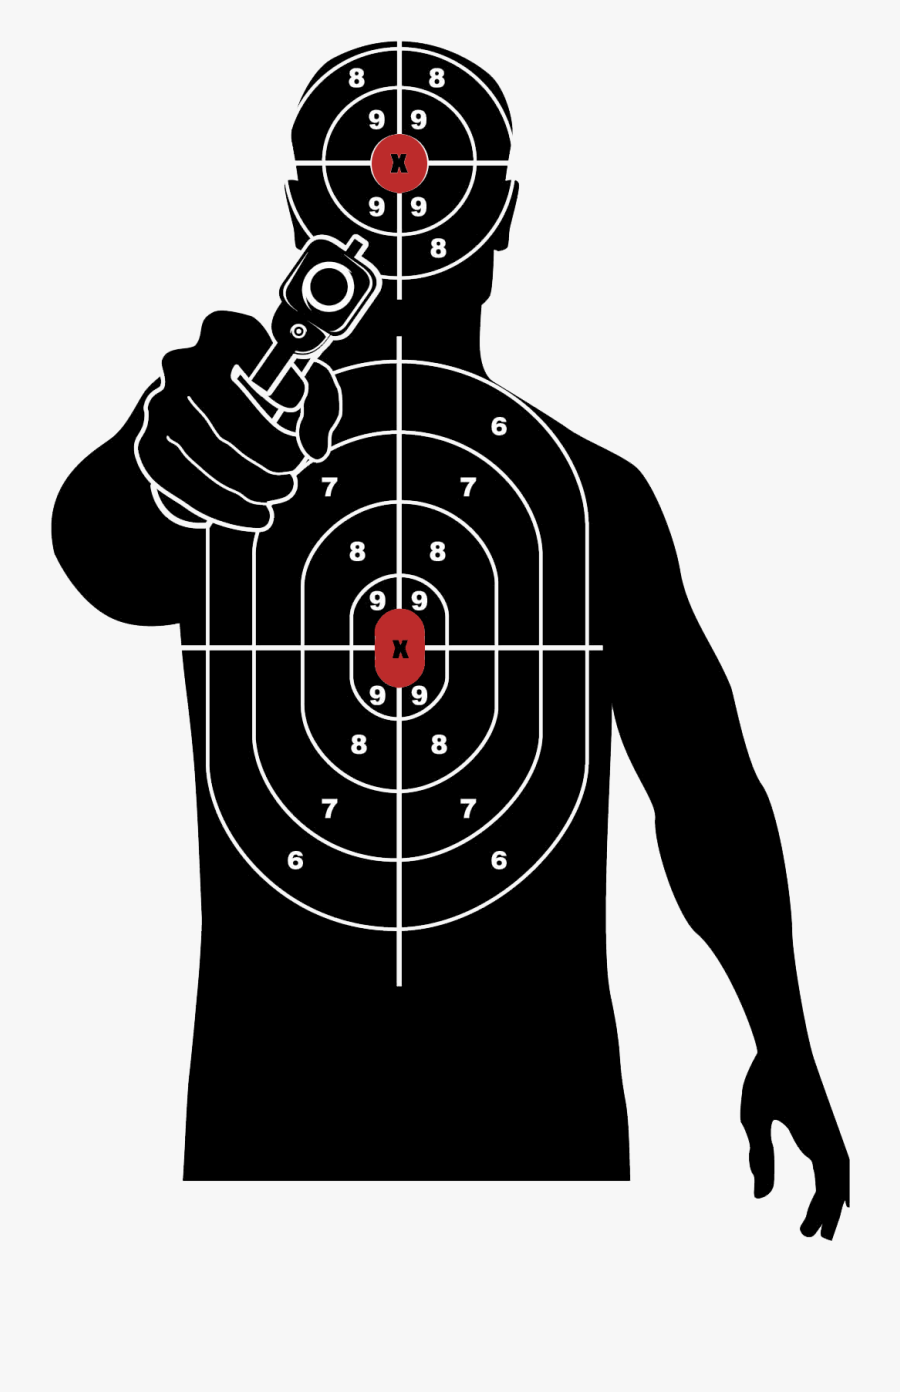 Concealed Weapon Permit Tallahassee - Gun Target, Transparent Clipart